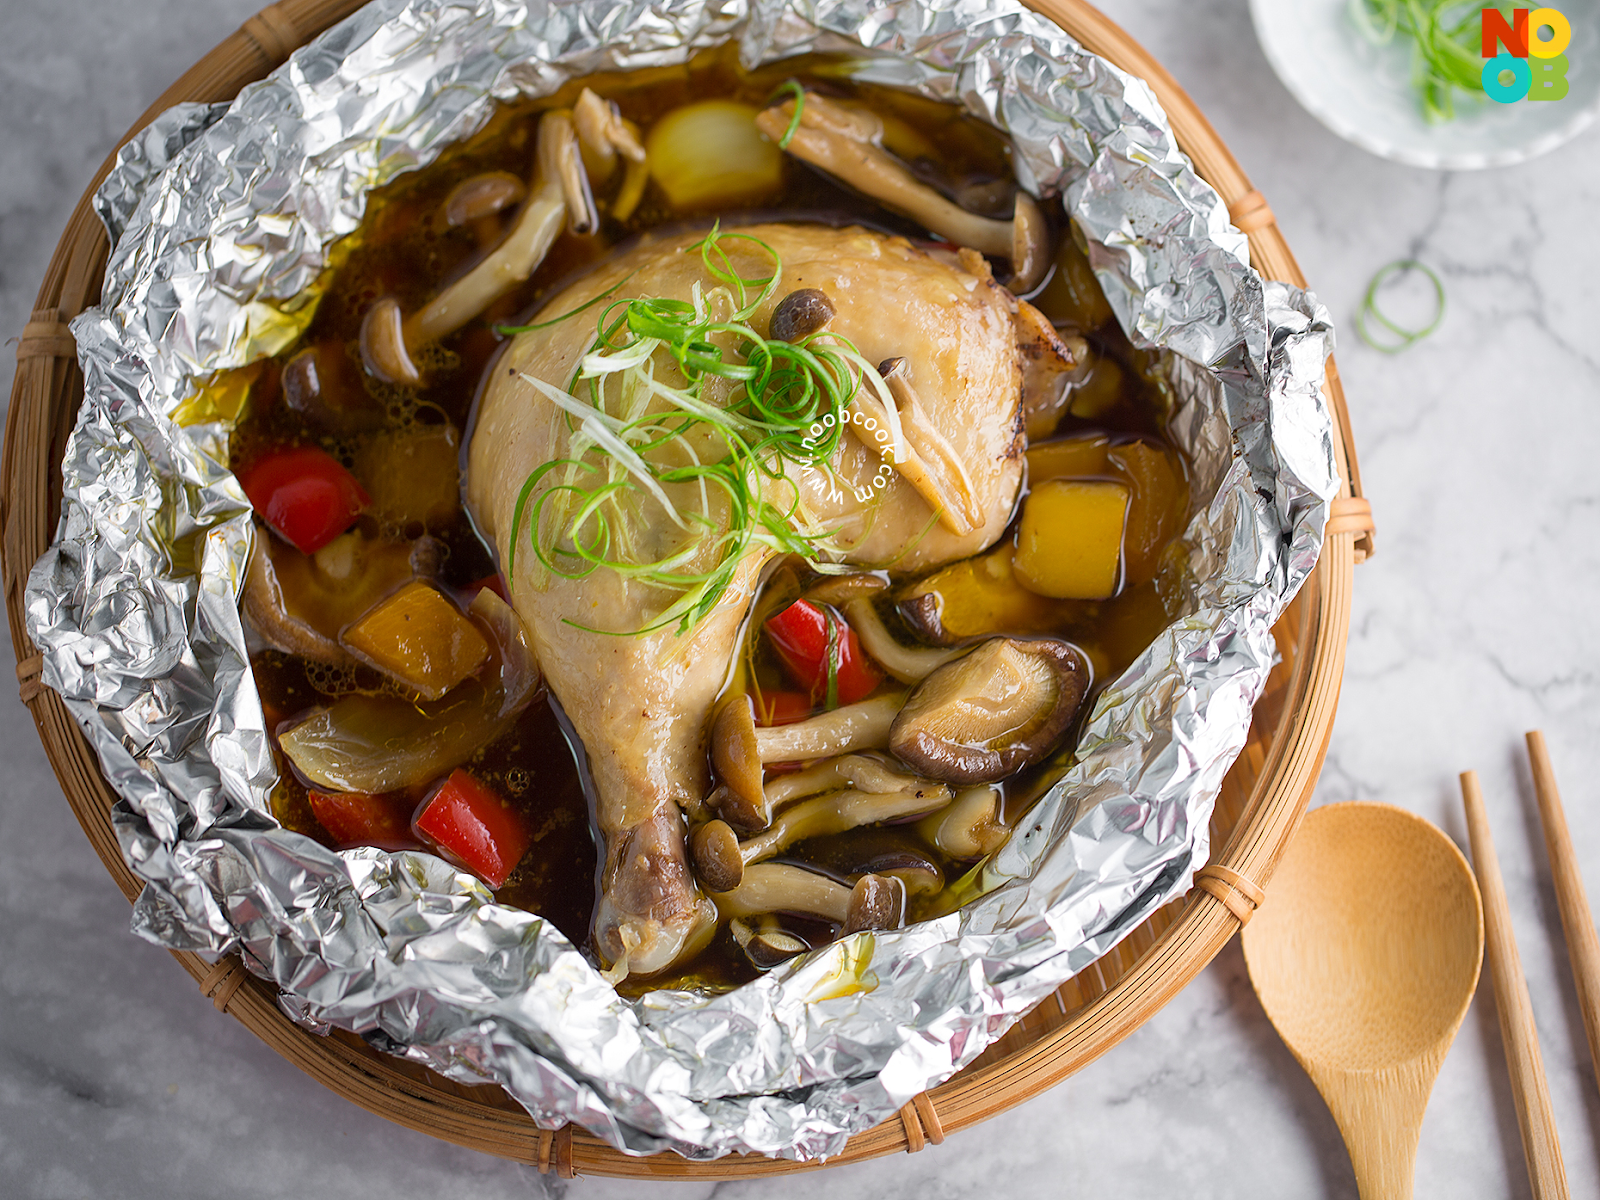 Wrap The Chicken In Foil